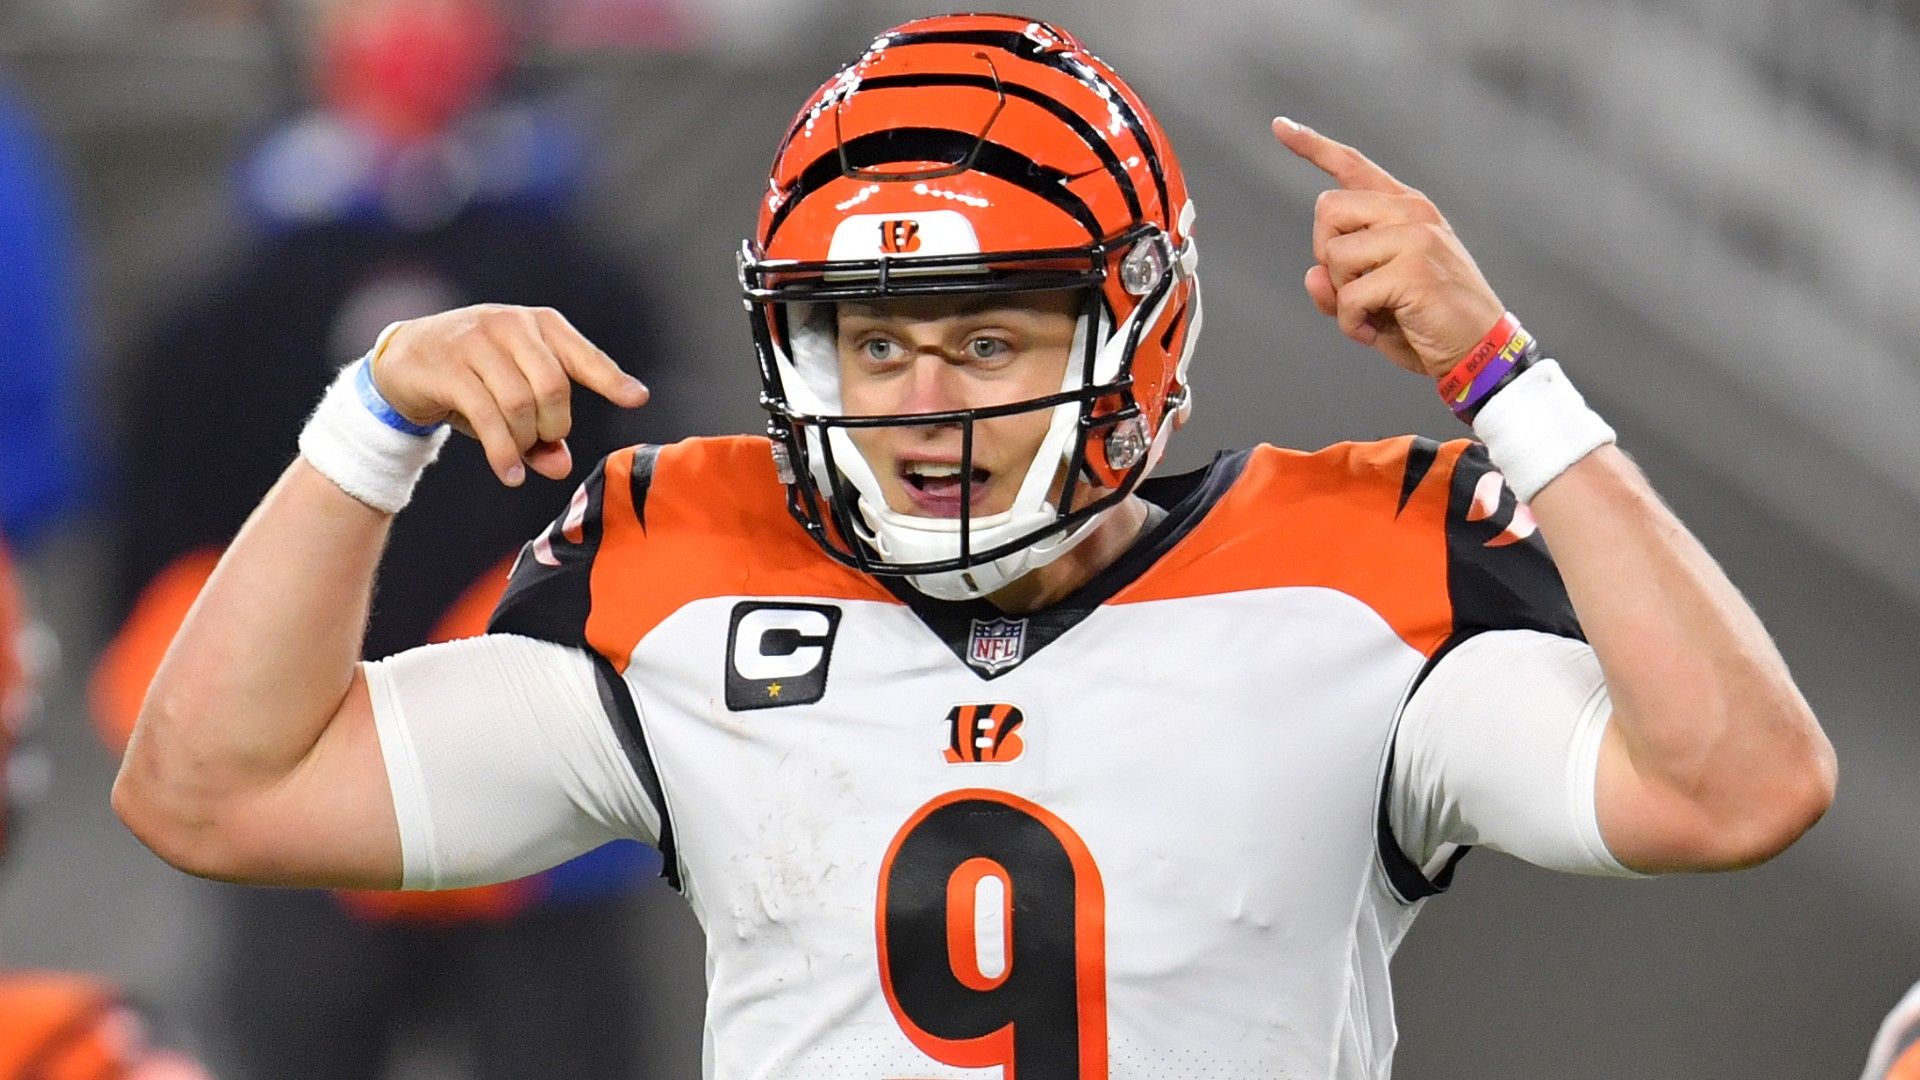 Joe Burrow Makes 0 2 Bengals Big Winners After Loss To Baker Mayfield, Browns. Sporting News Canada